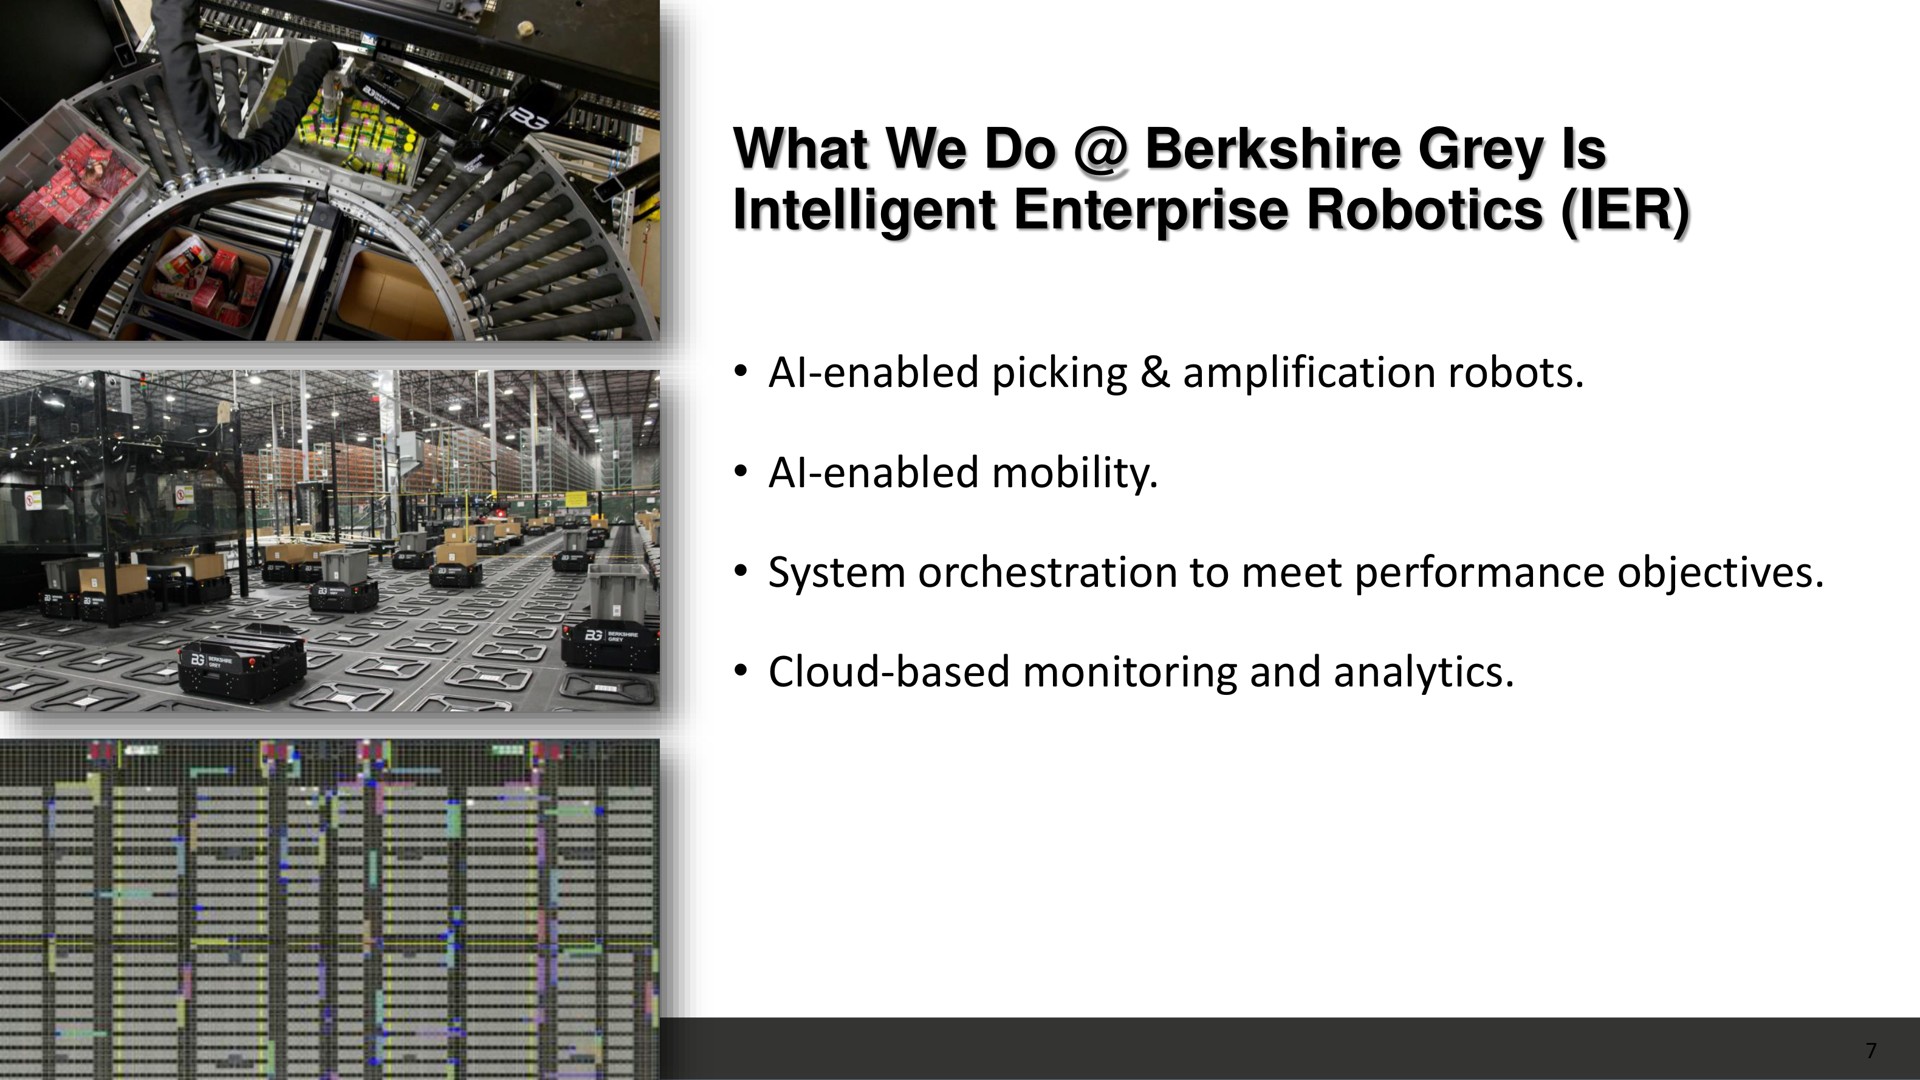 what we do grey is intelligent enterprise enabled picking amplification robots enabled mobility system orchestration to meet performance objectives cloud based monitoring and analytics enabled enabled | Berkshire Grey